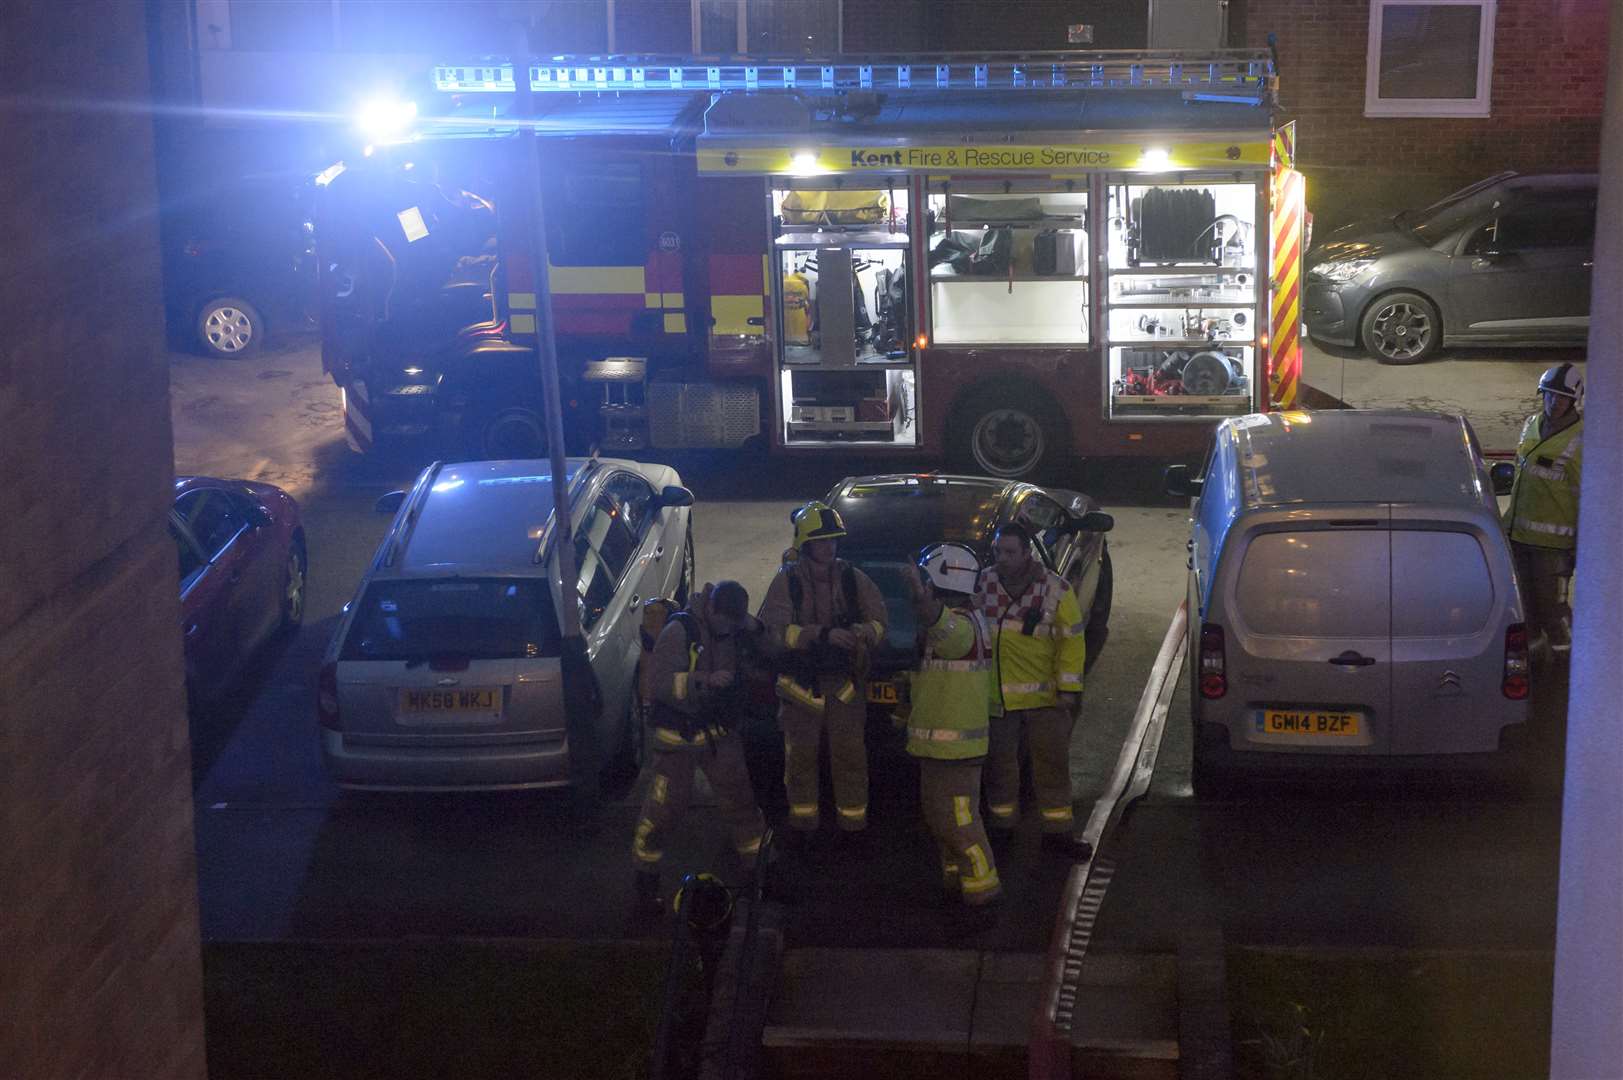 A Kent fire and Rescue Service exercise,takes place at Dudley Lodge